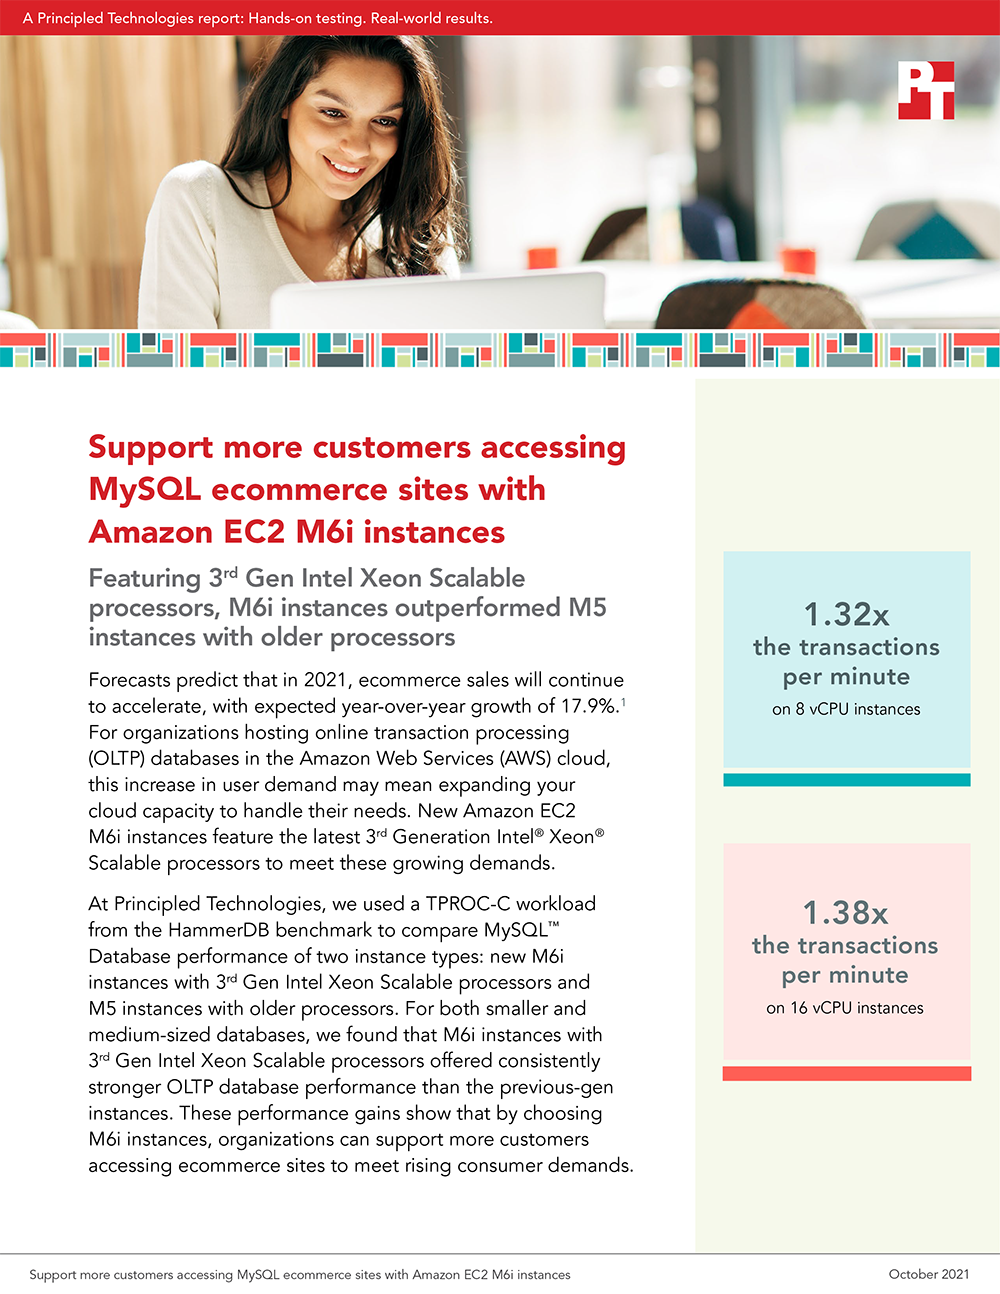 Support more customers accessing MySQL ecommerce sites with Amazon EC2 M6i instances